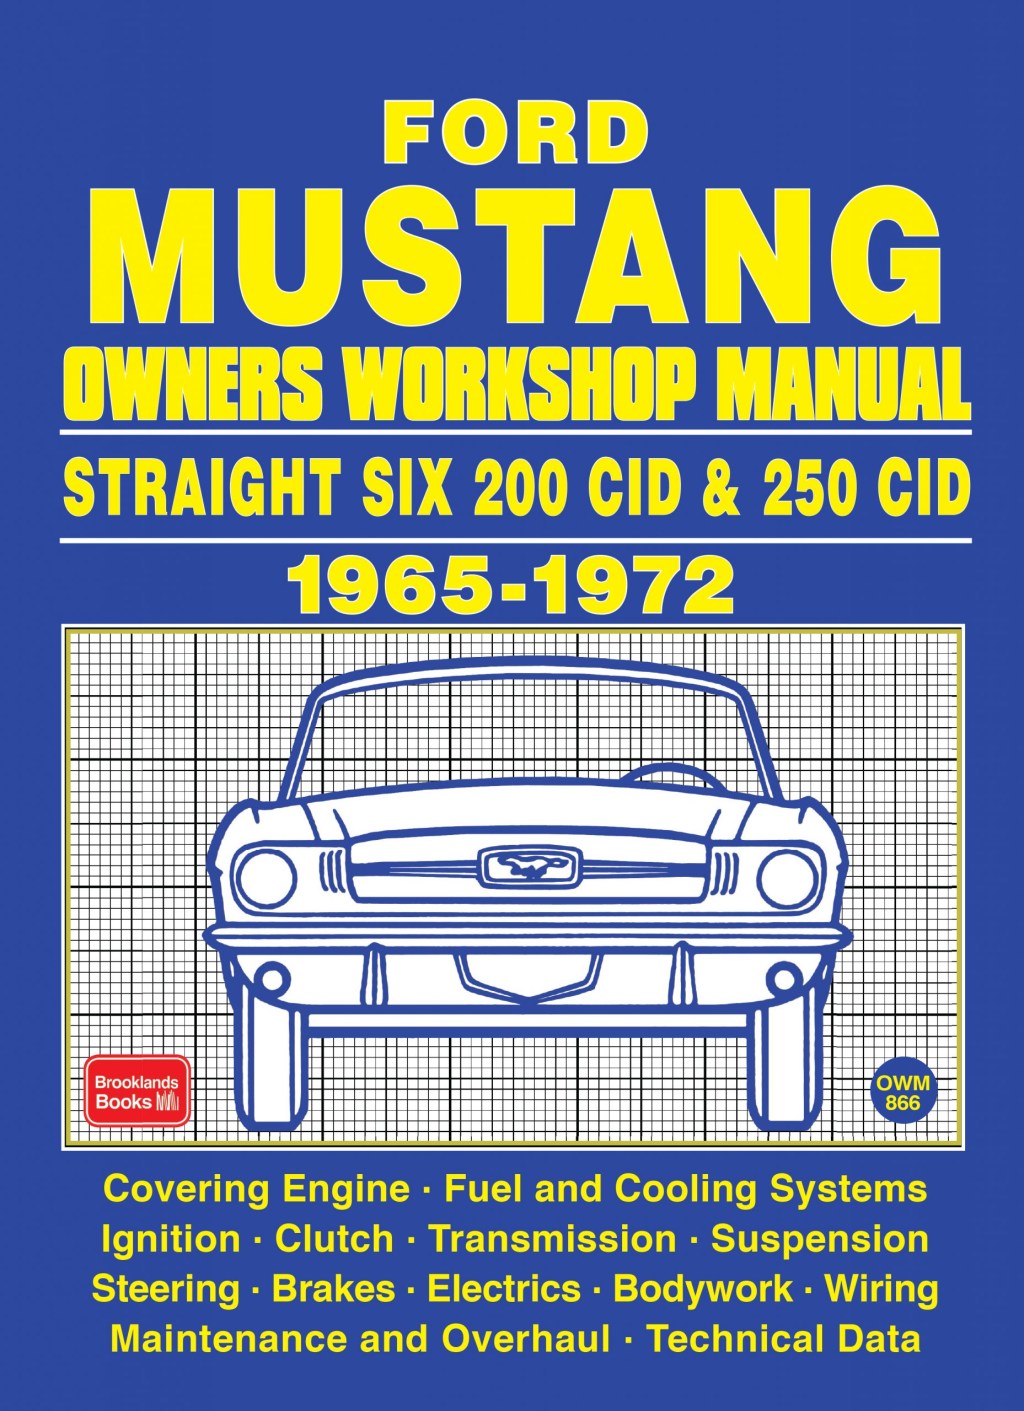 ford mustang straight six owners workshop manual